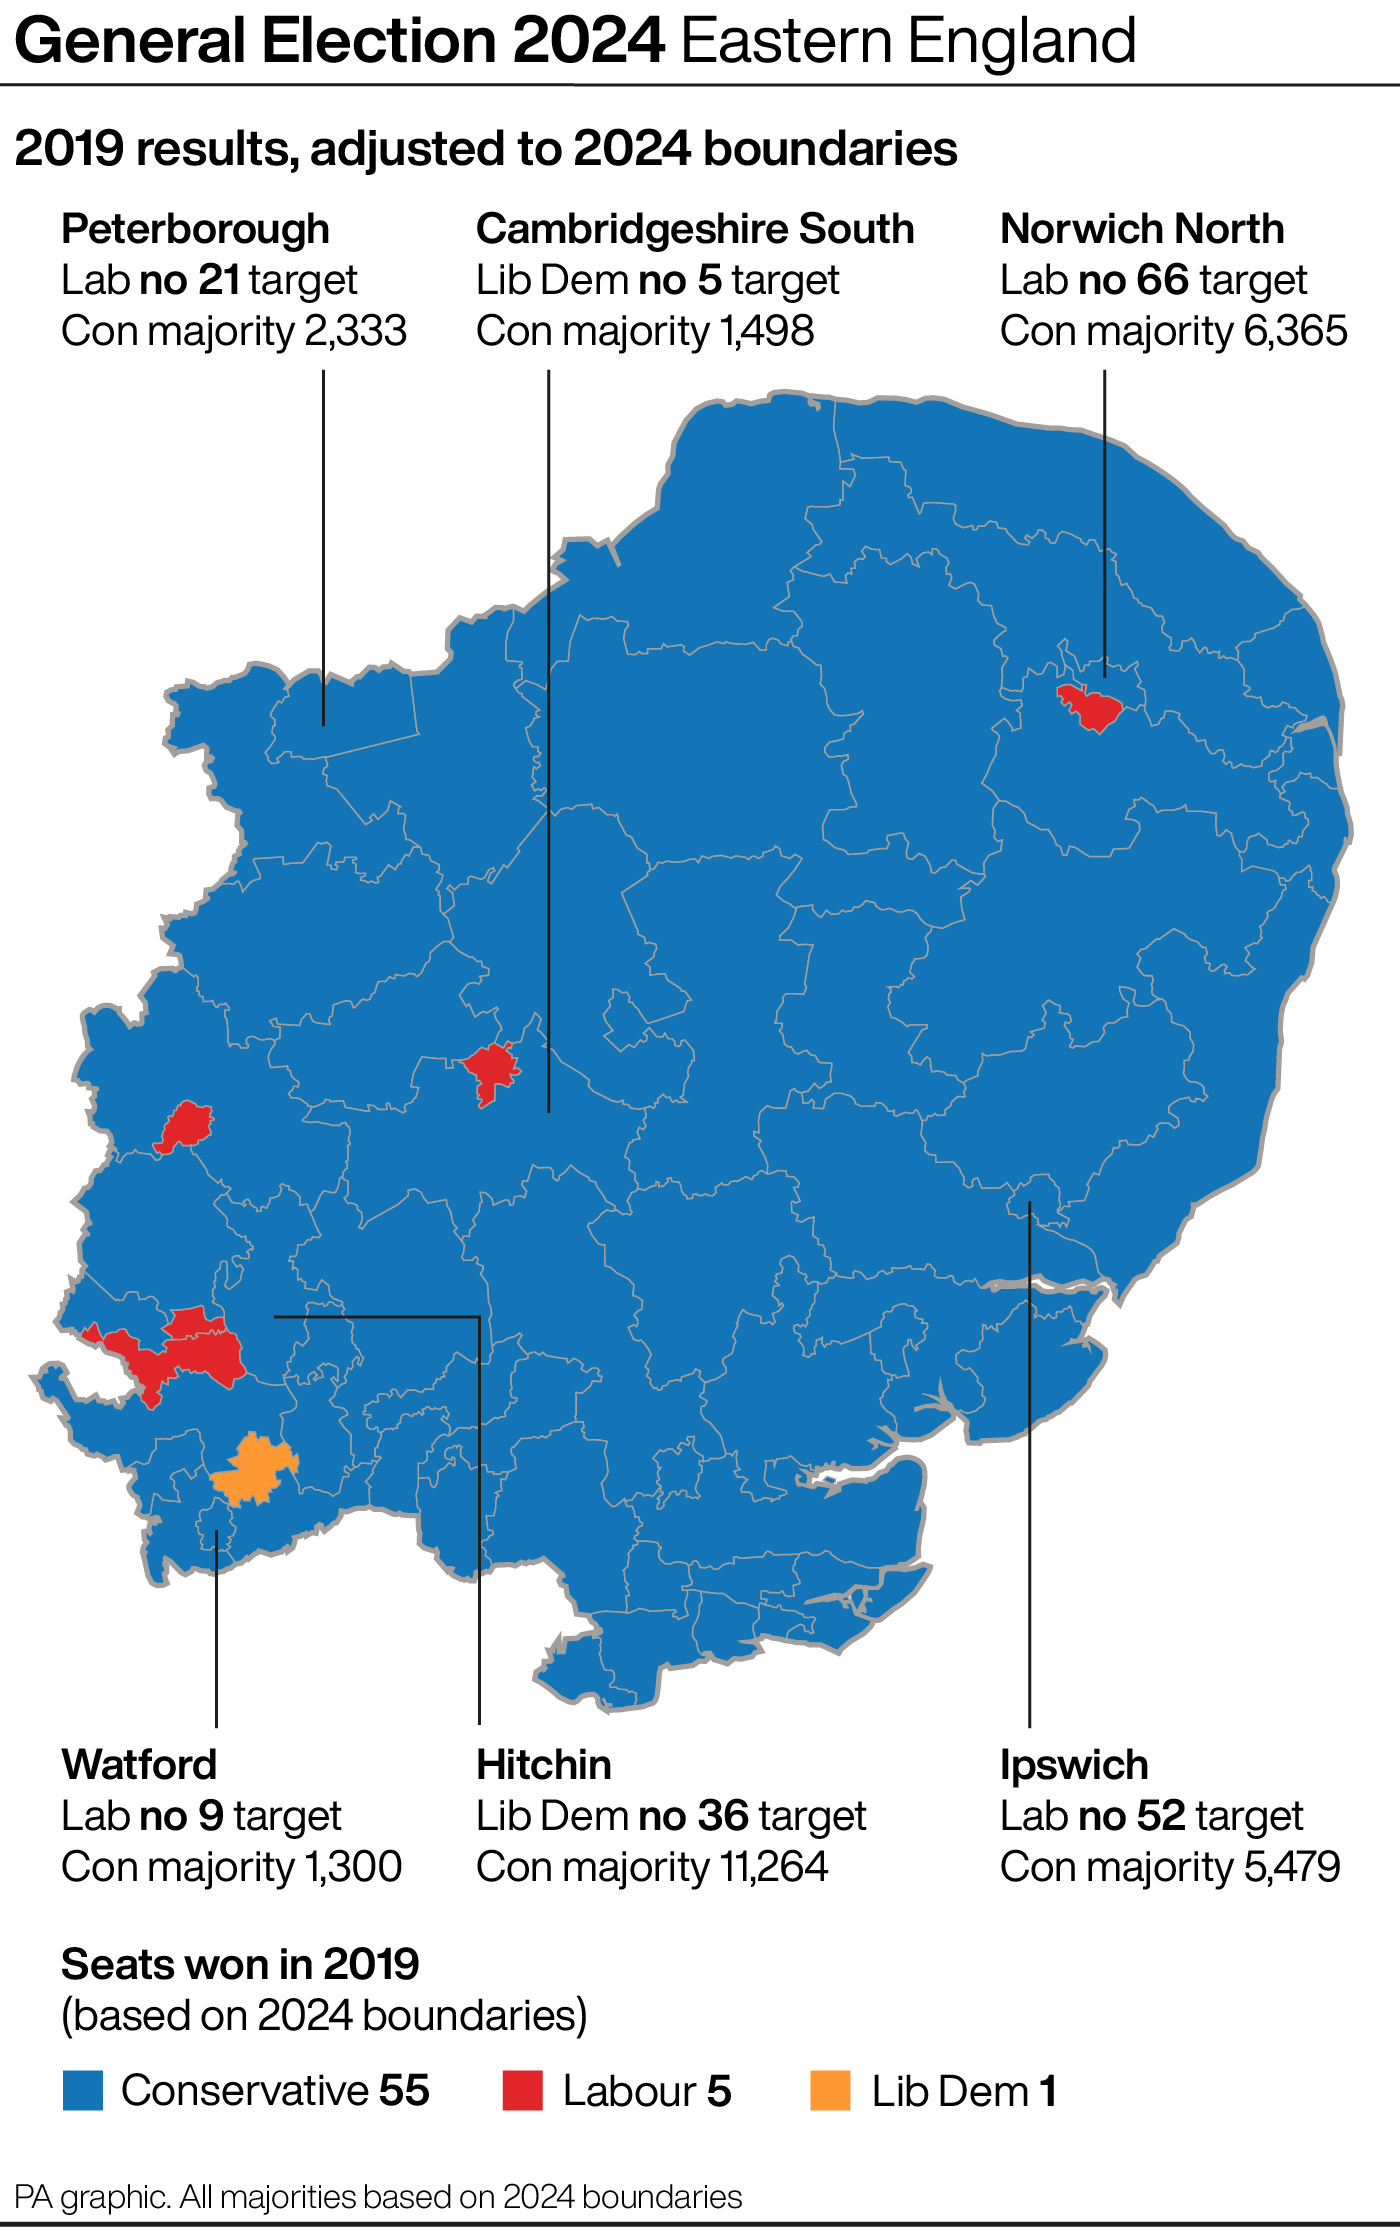 A map showing key battleground seats in Eastern England at the General Election